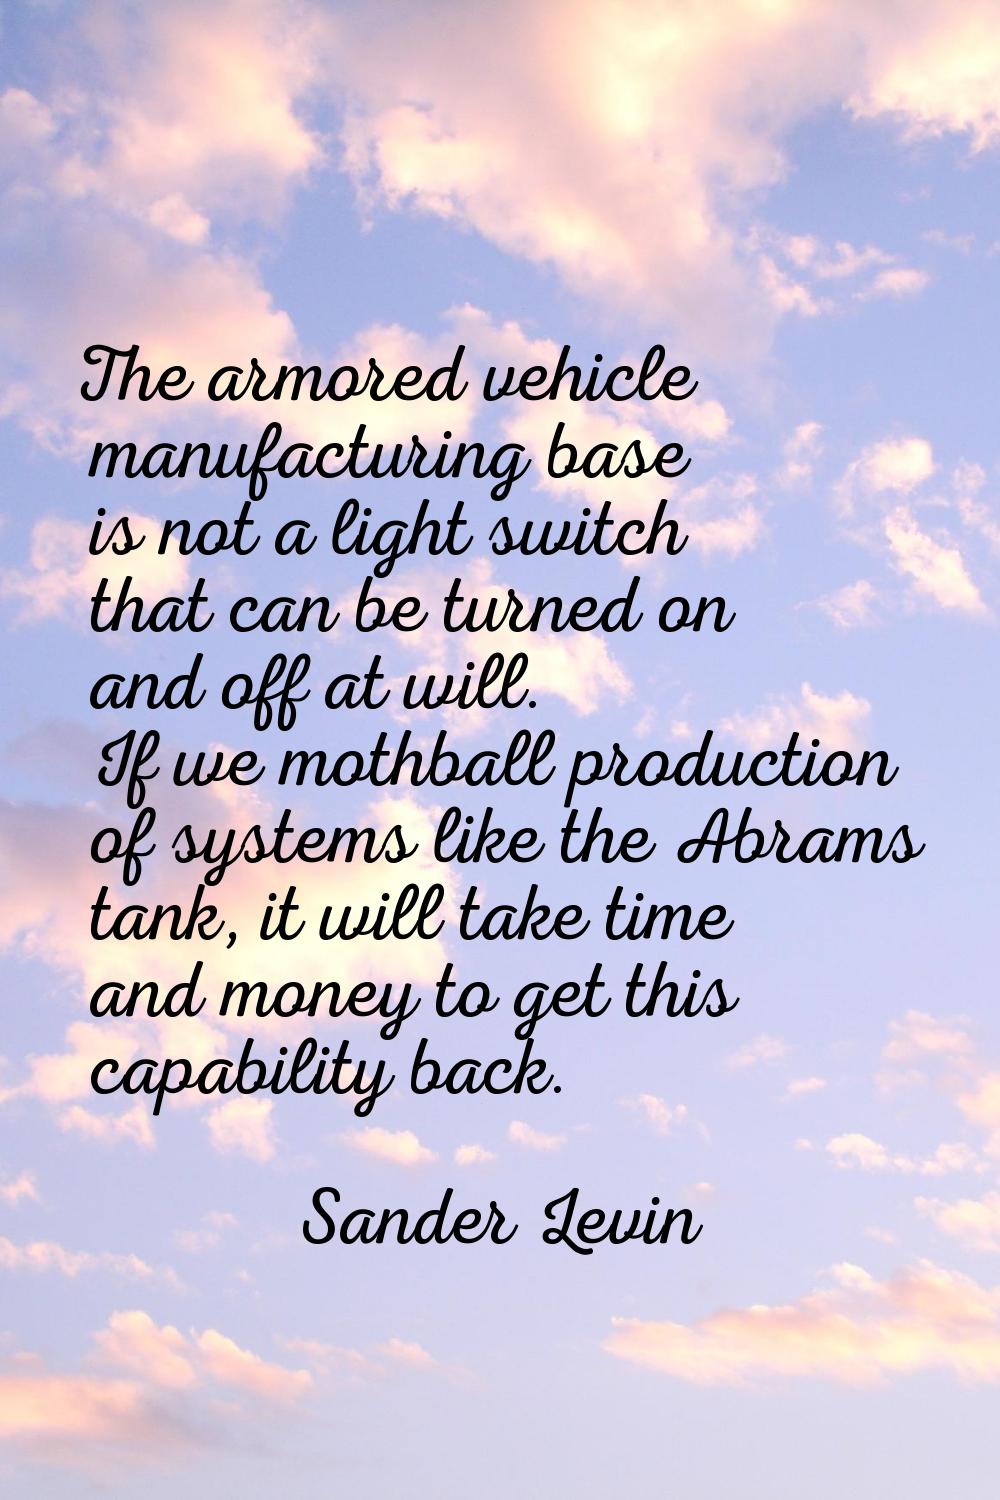 The armored vehicle manufacturing base is not a light switch that can be turned on and off at will.